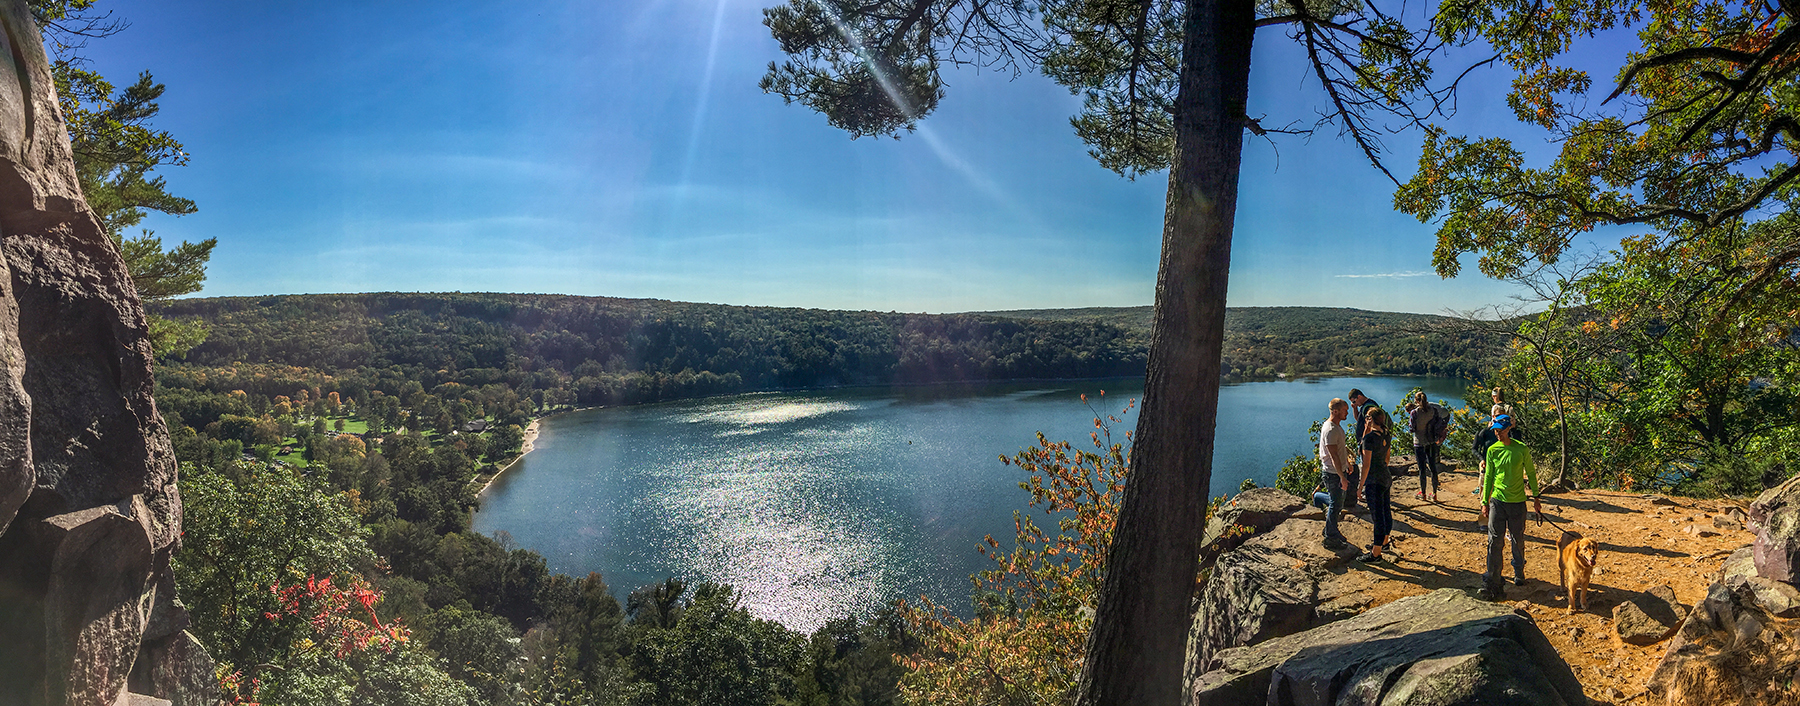 View from atop the Balanced Rock Trail at the intersection with the East Bluff Trail at Devil's Lake State Park